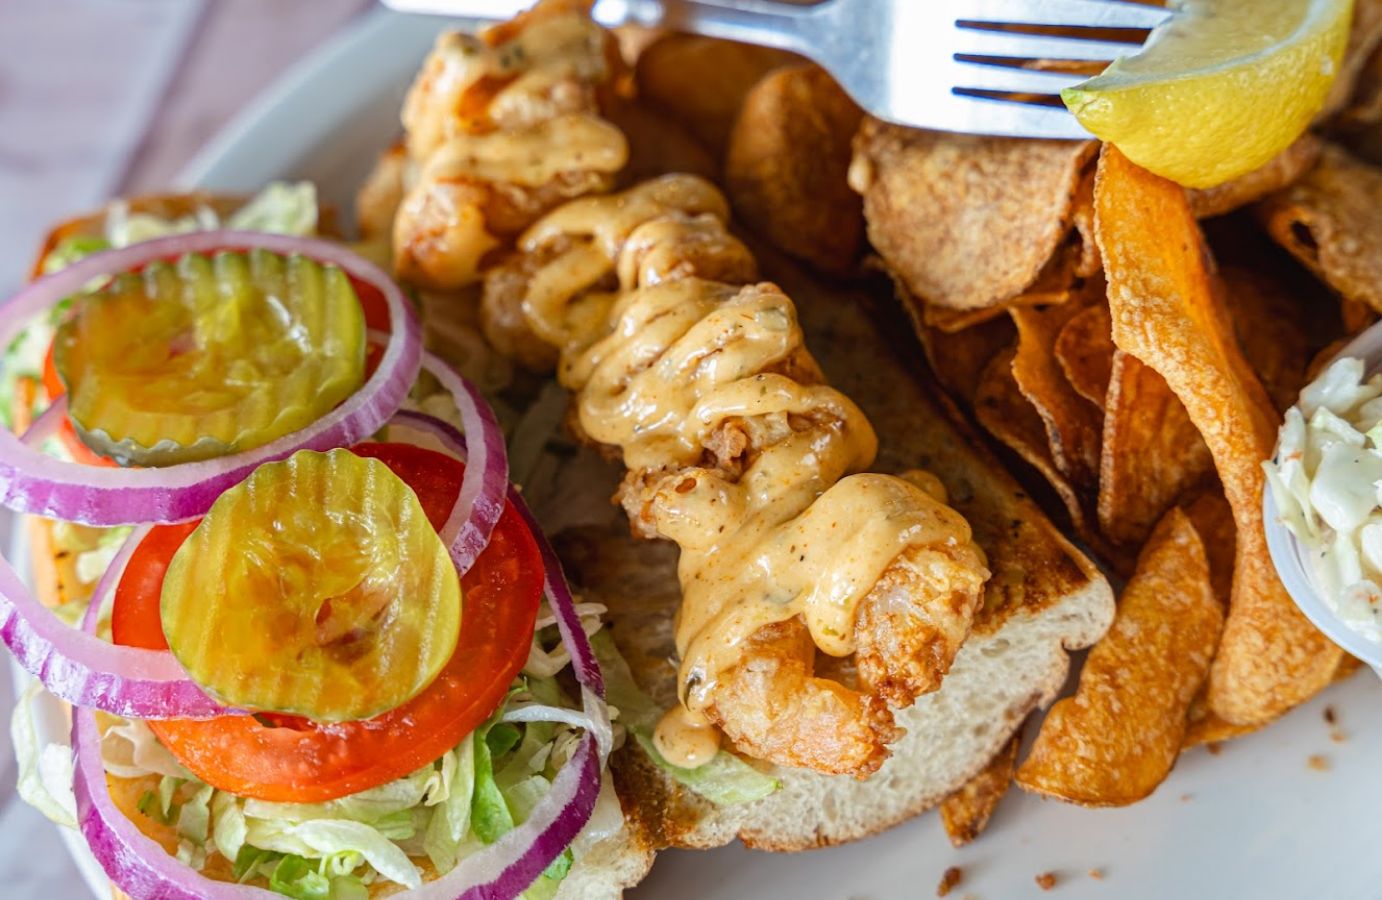 Closeup of a Po' Boy shrimp sandwich with some chips on the side